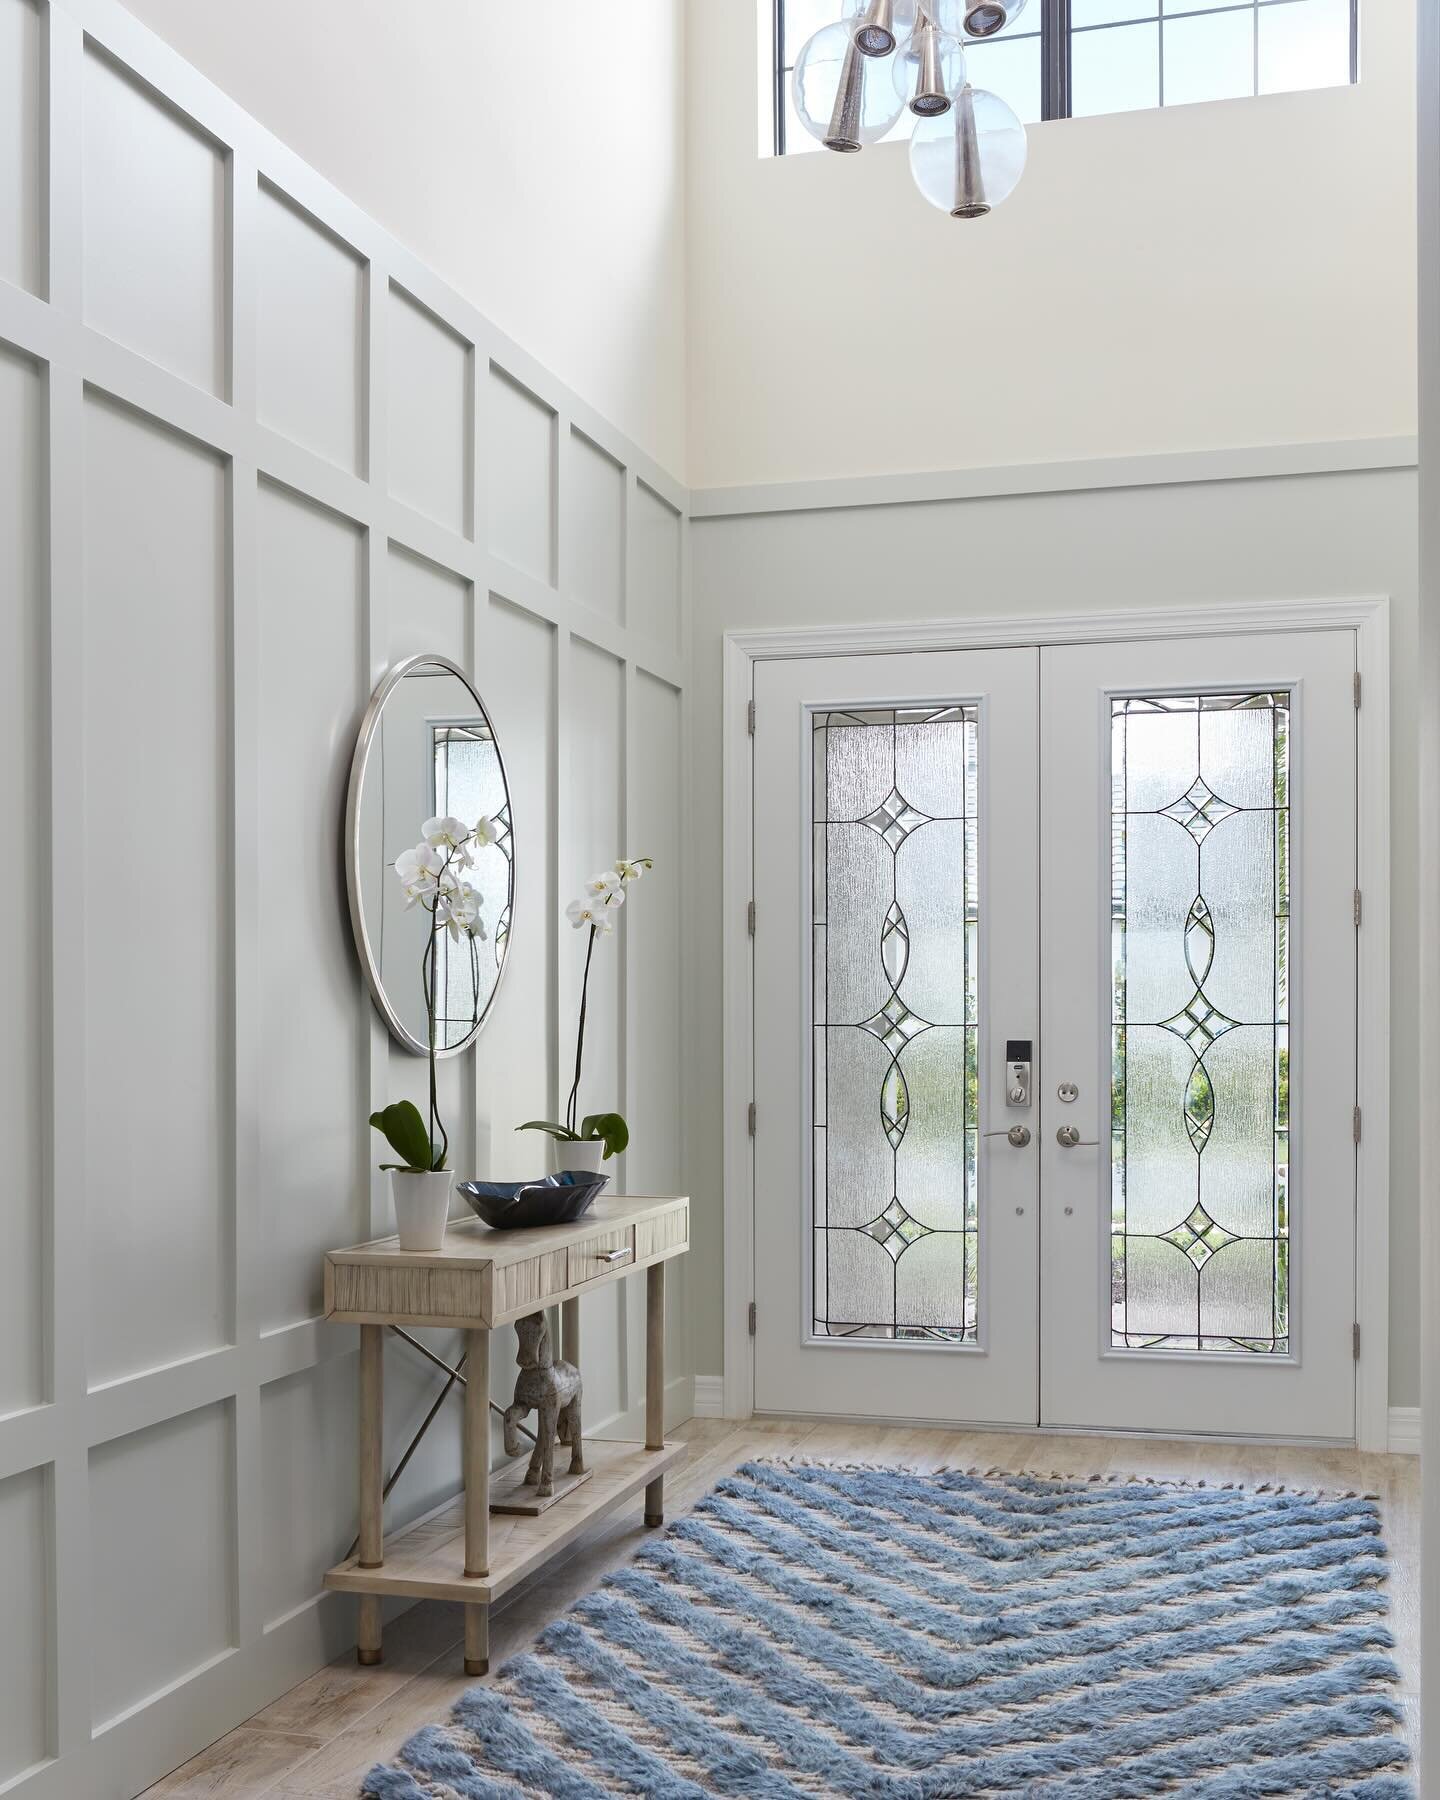 Transform your entry into a welcoming and stylish space that sets the tone for your entire home! Your home&rsquo;s foyer is more than just an entry, it&rsquo;s the first thing you and your guests see when you walk in the door. Make a great first impr